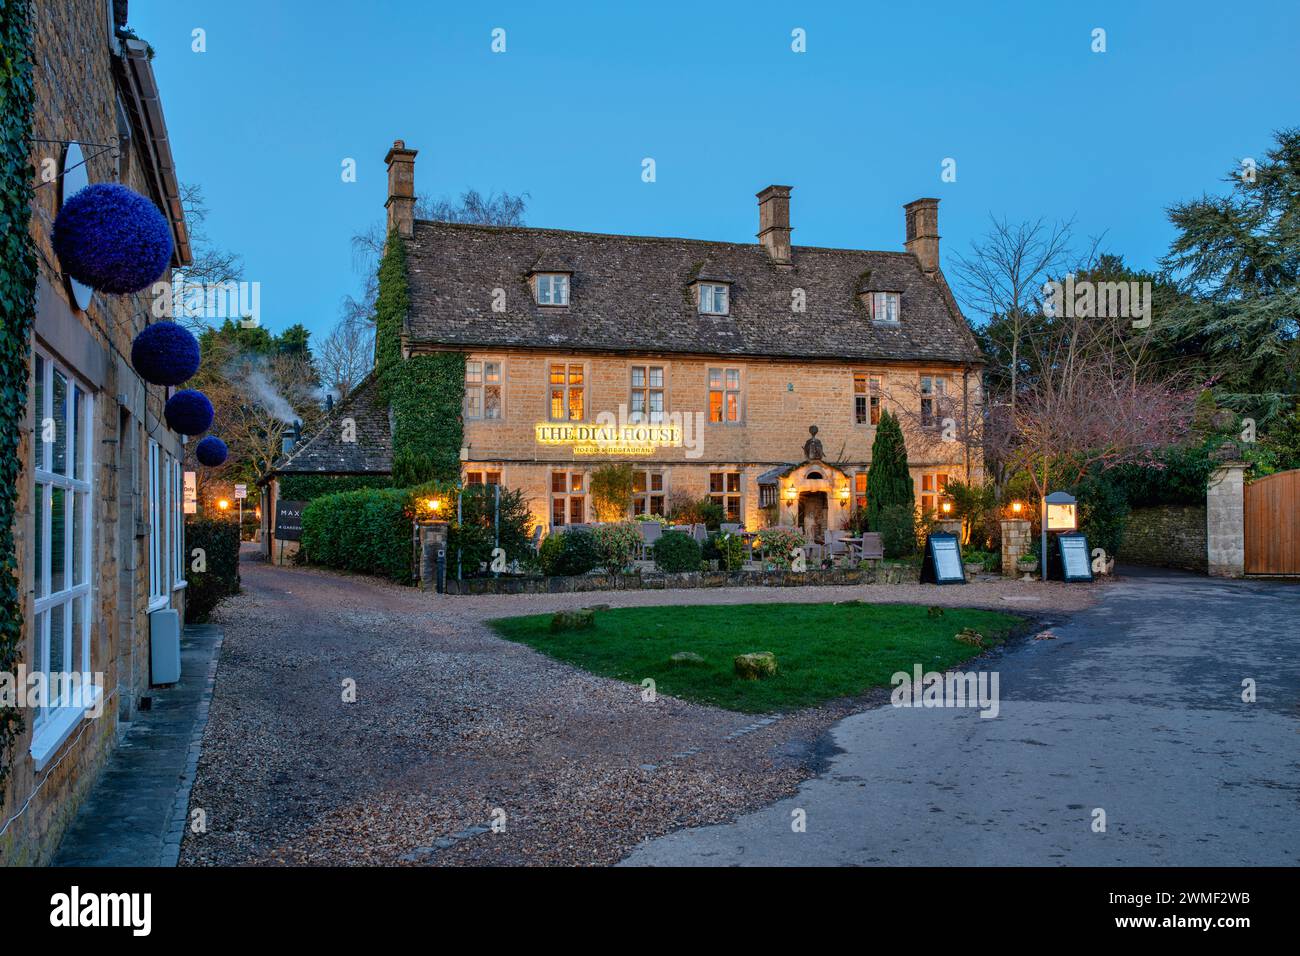 Il Dial House Hotel al crepuscolo. Bourton on the Water, Cotswolds, Gloucestershire, Inghilterra Foto Stock